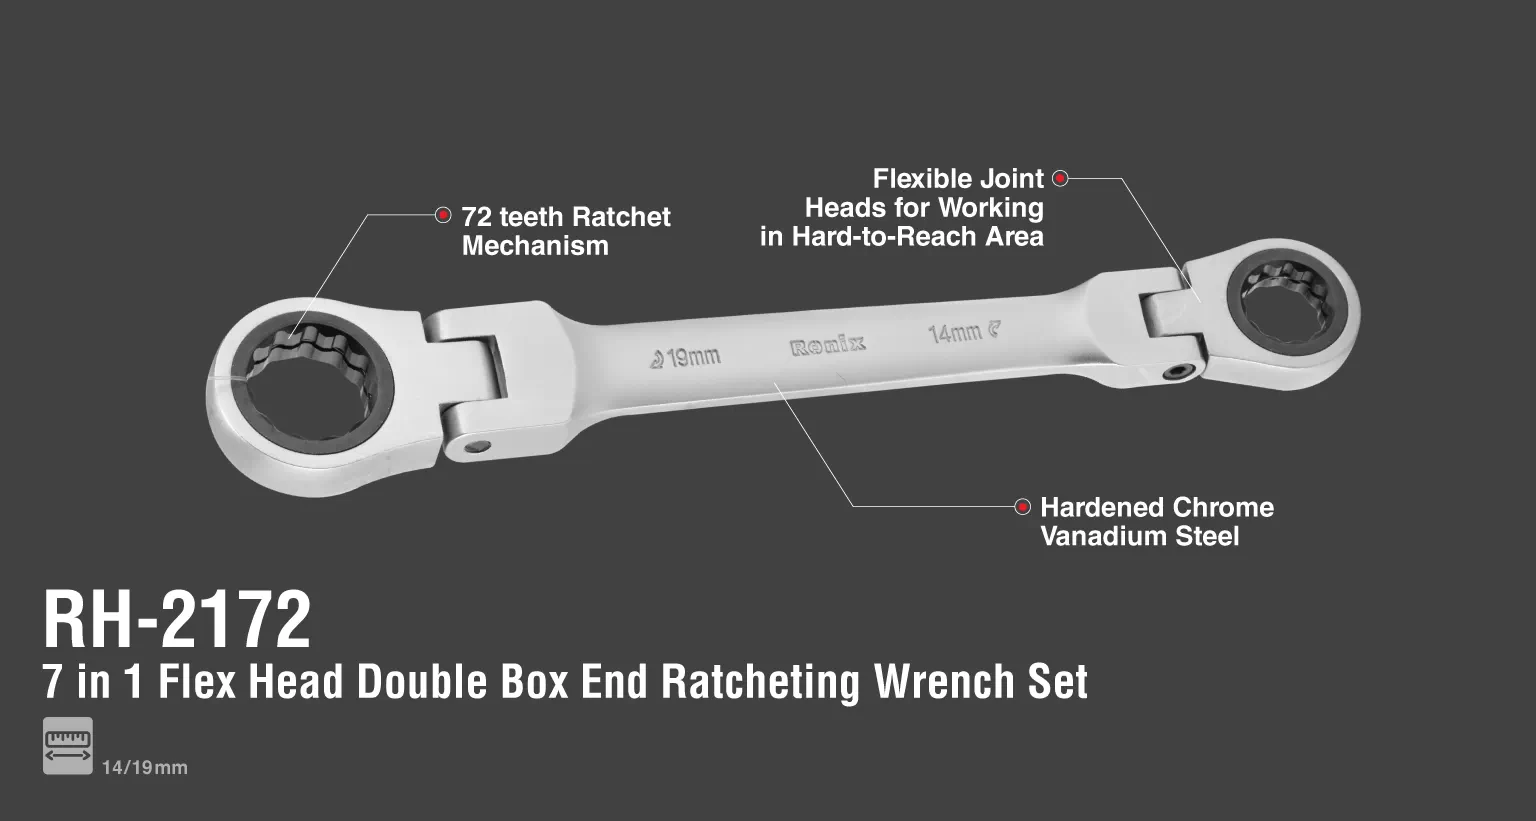 7 in 1 flex head double box end ratcheting wrench set_details